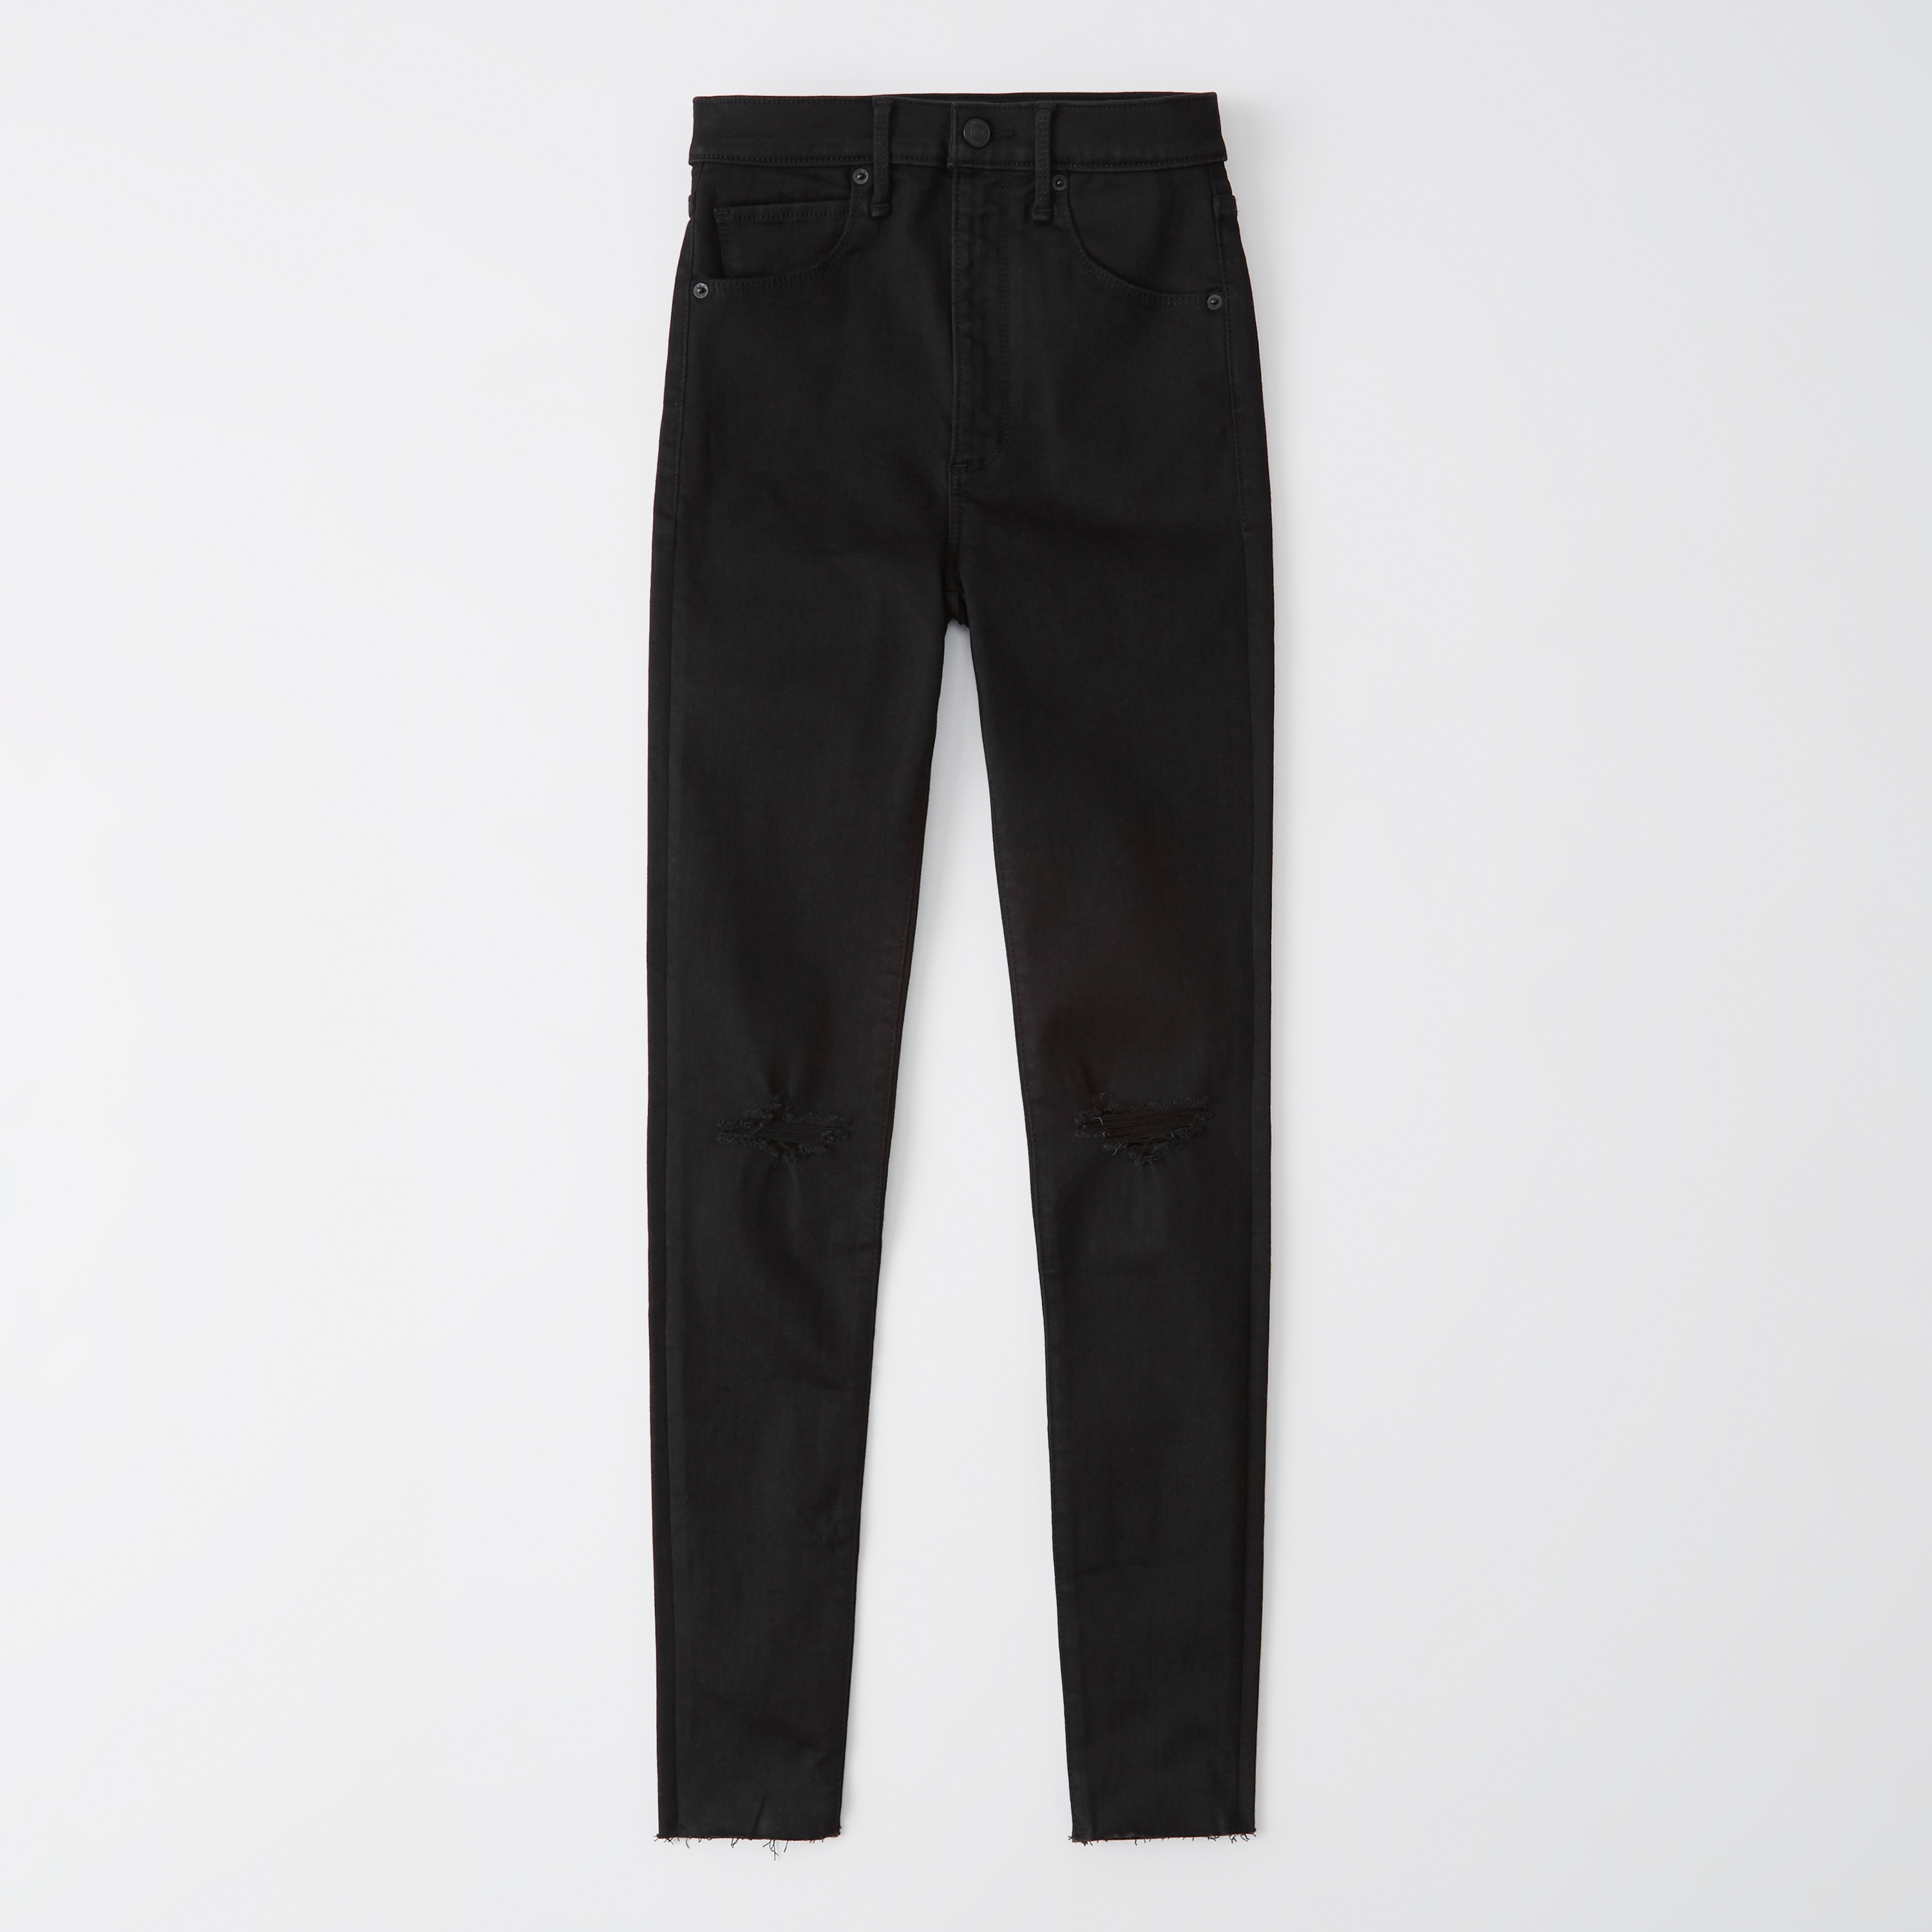 abercrombie fitch Super Skinny Pants